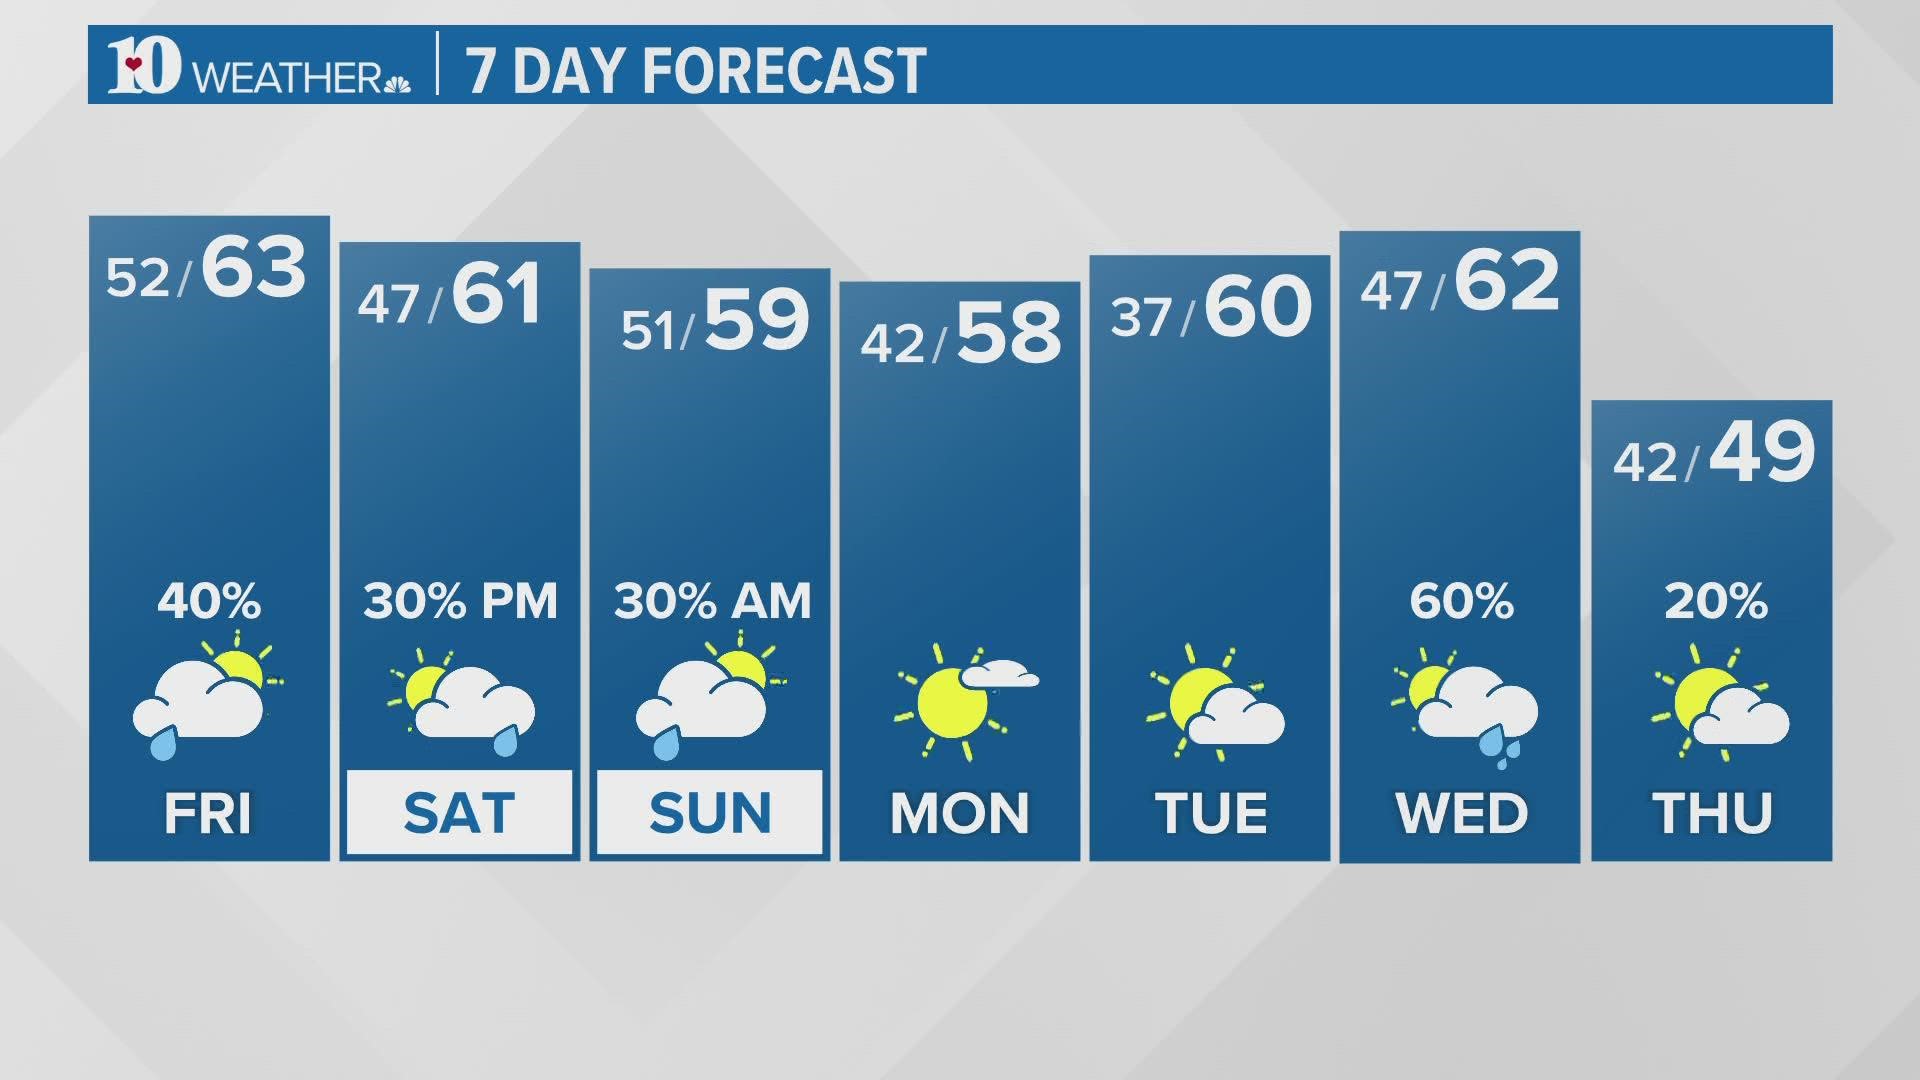 We are looking at some showers late Saturday into early Sunday with a stronger storm next week.